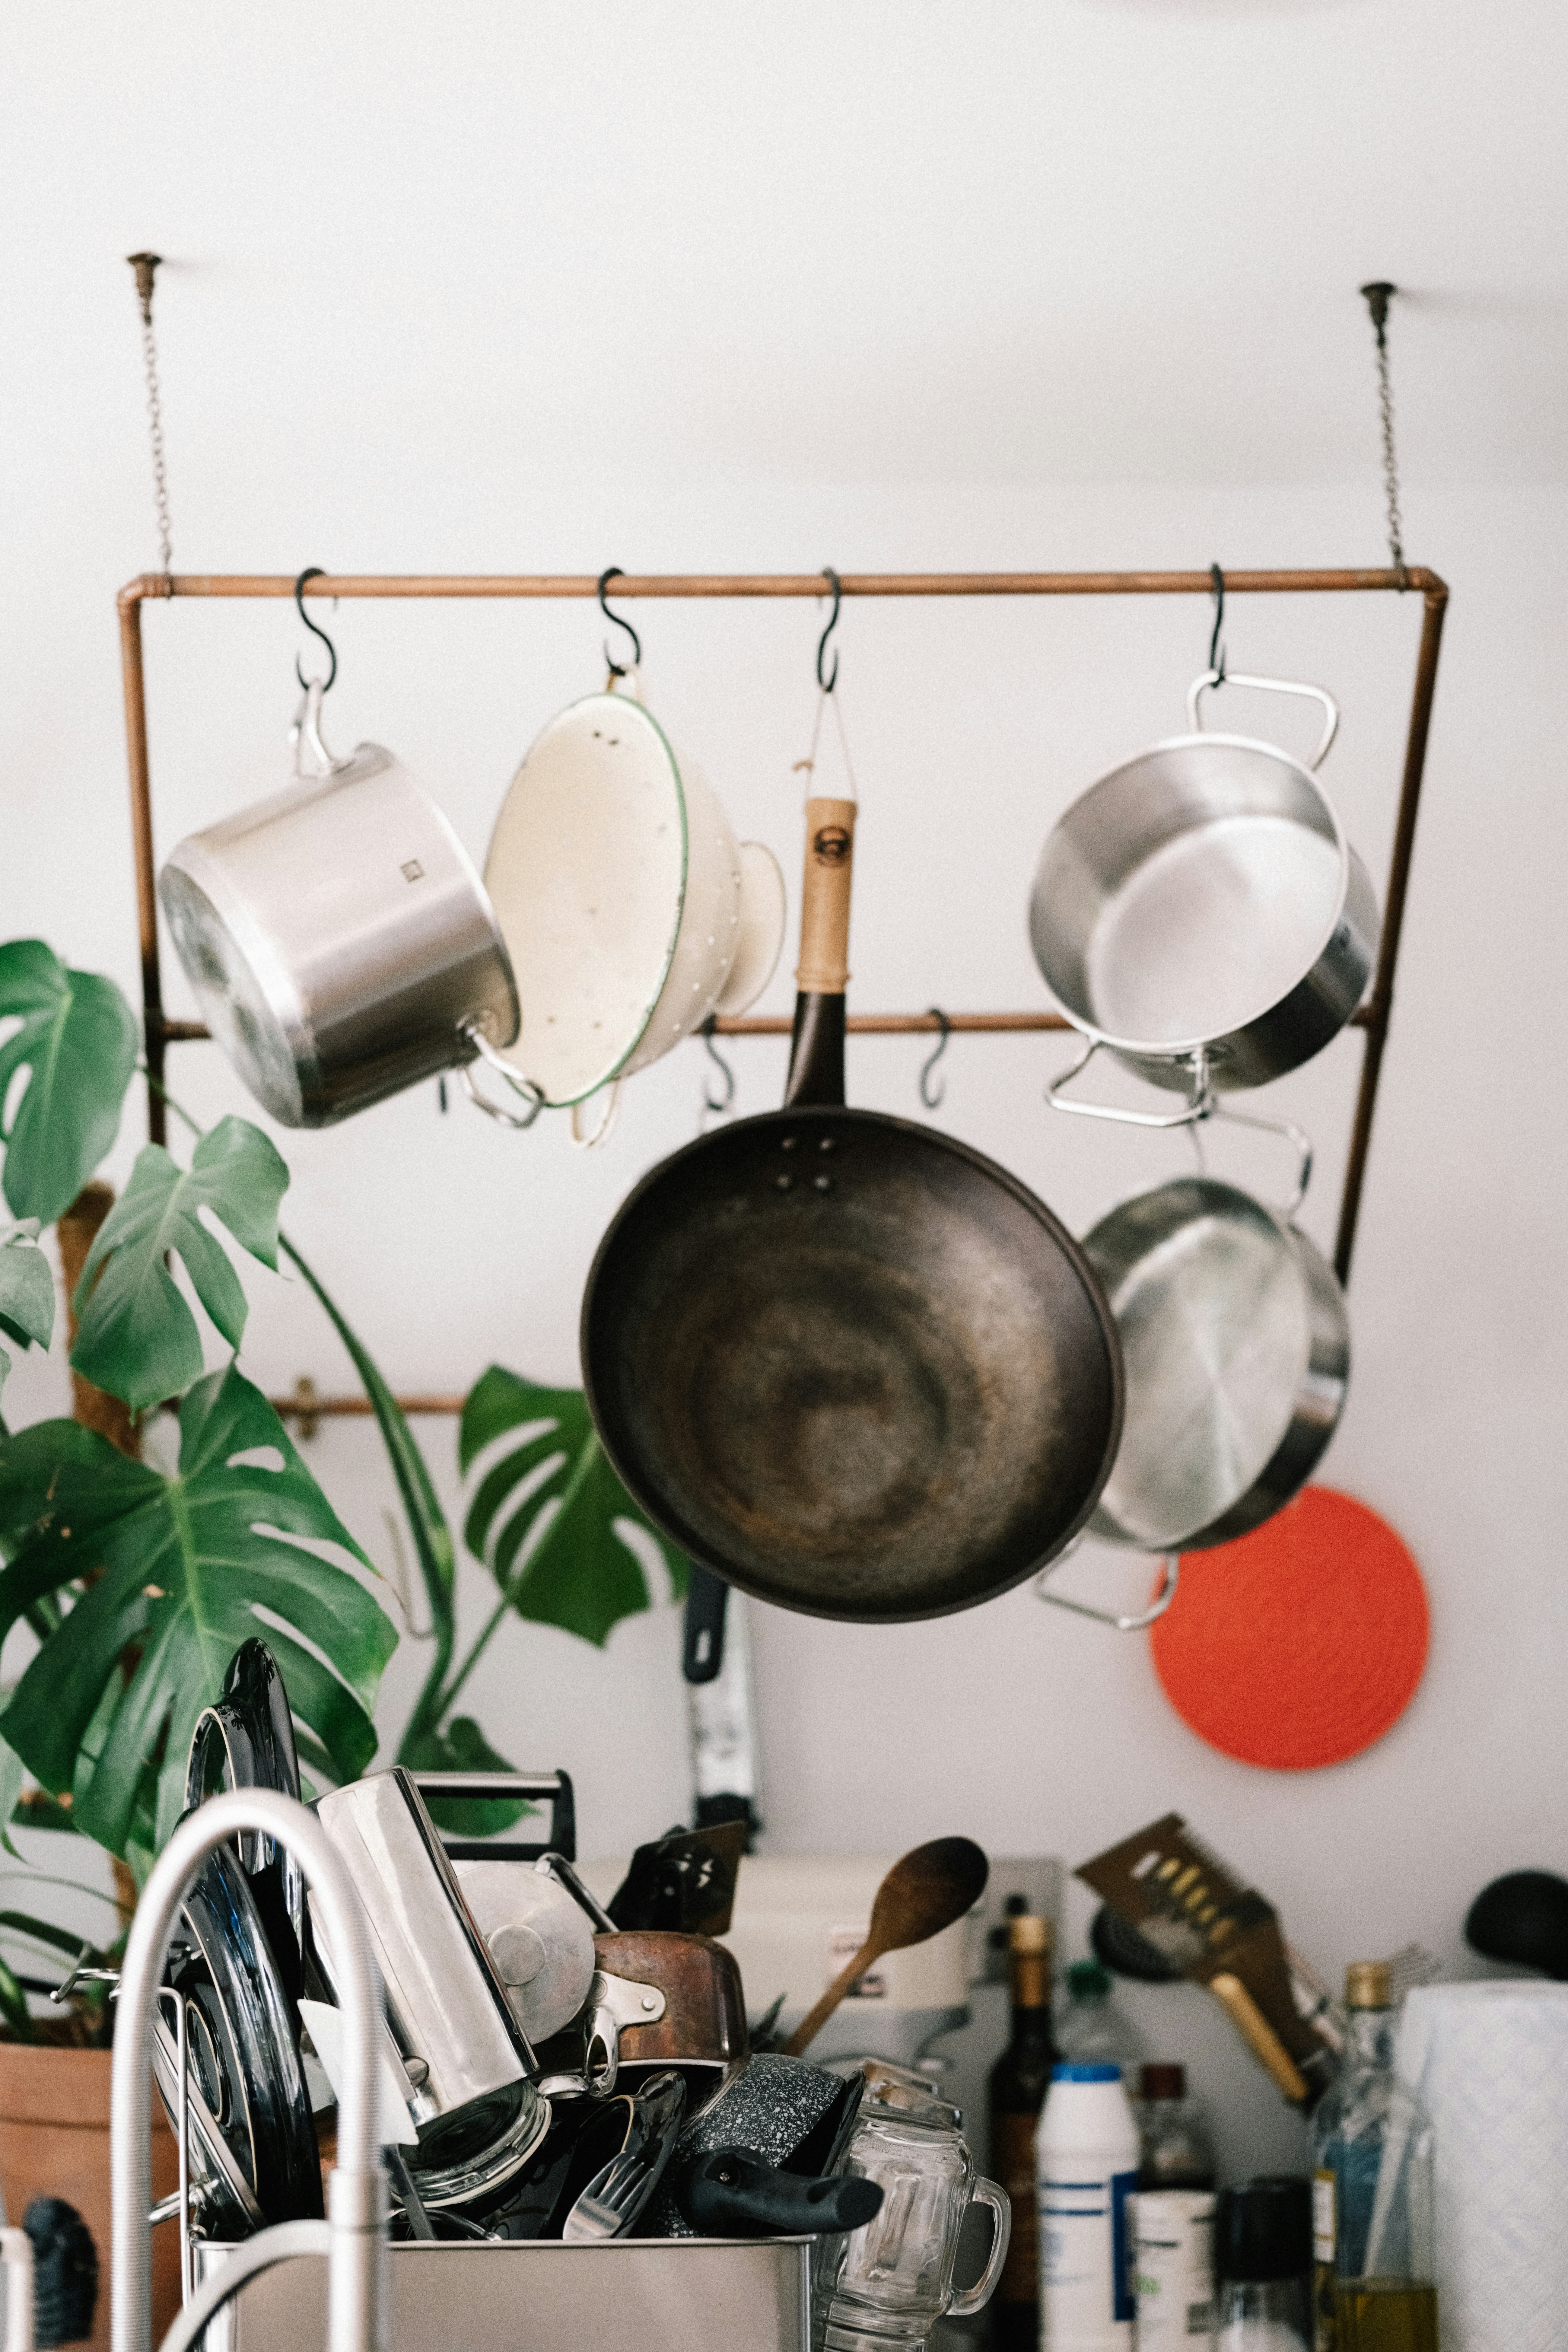 How Do I Clean And Maintain My Cookware To Prolong Its Lifespan?